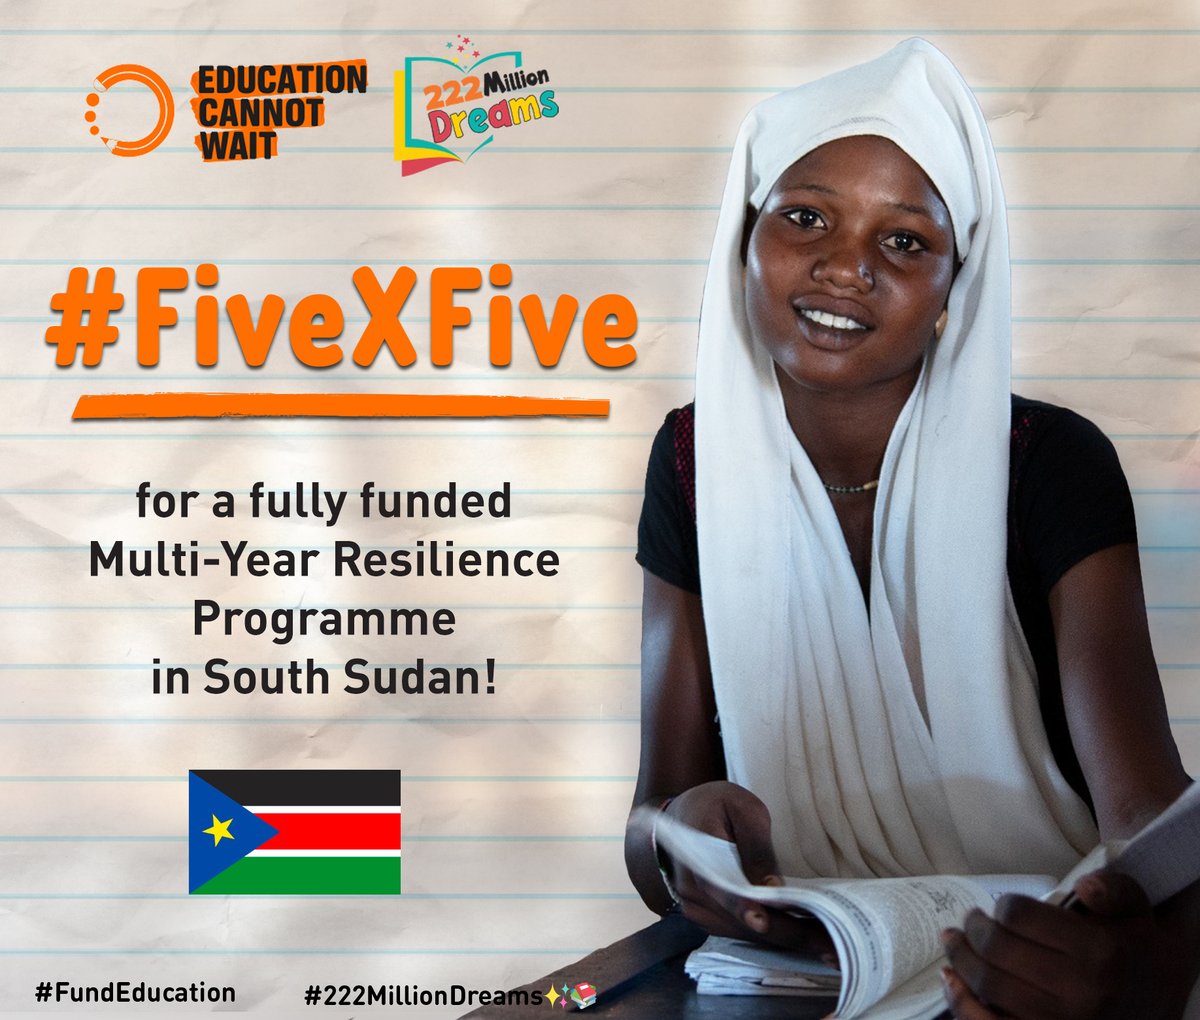 📣#SouthSudan Cannot Wait!

#FivexFive: @EduCannotWait calls on5️⃣donors to step forward with $5M for a fully-funded multi-year resilience programme to ensure girls/boys impacted by crises in 🇸🇸 can access safe, inclusive, #QualityEducation!

@UN @MinistrySsd #222MillionDreams✨📚